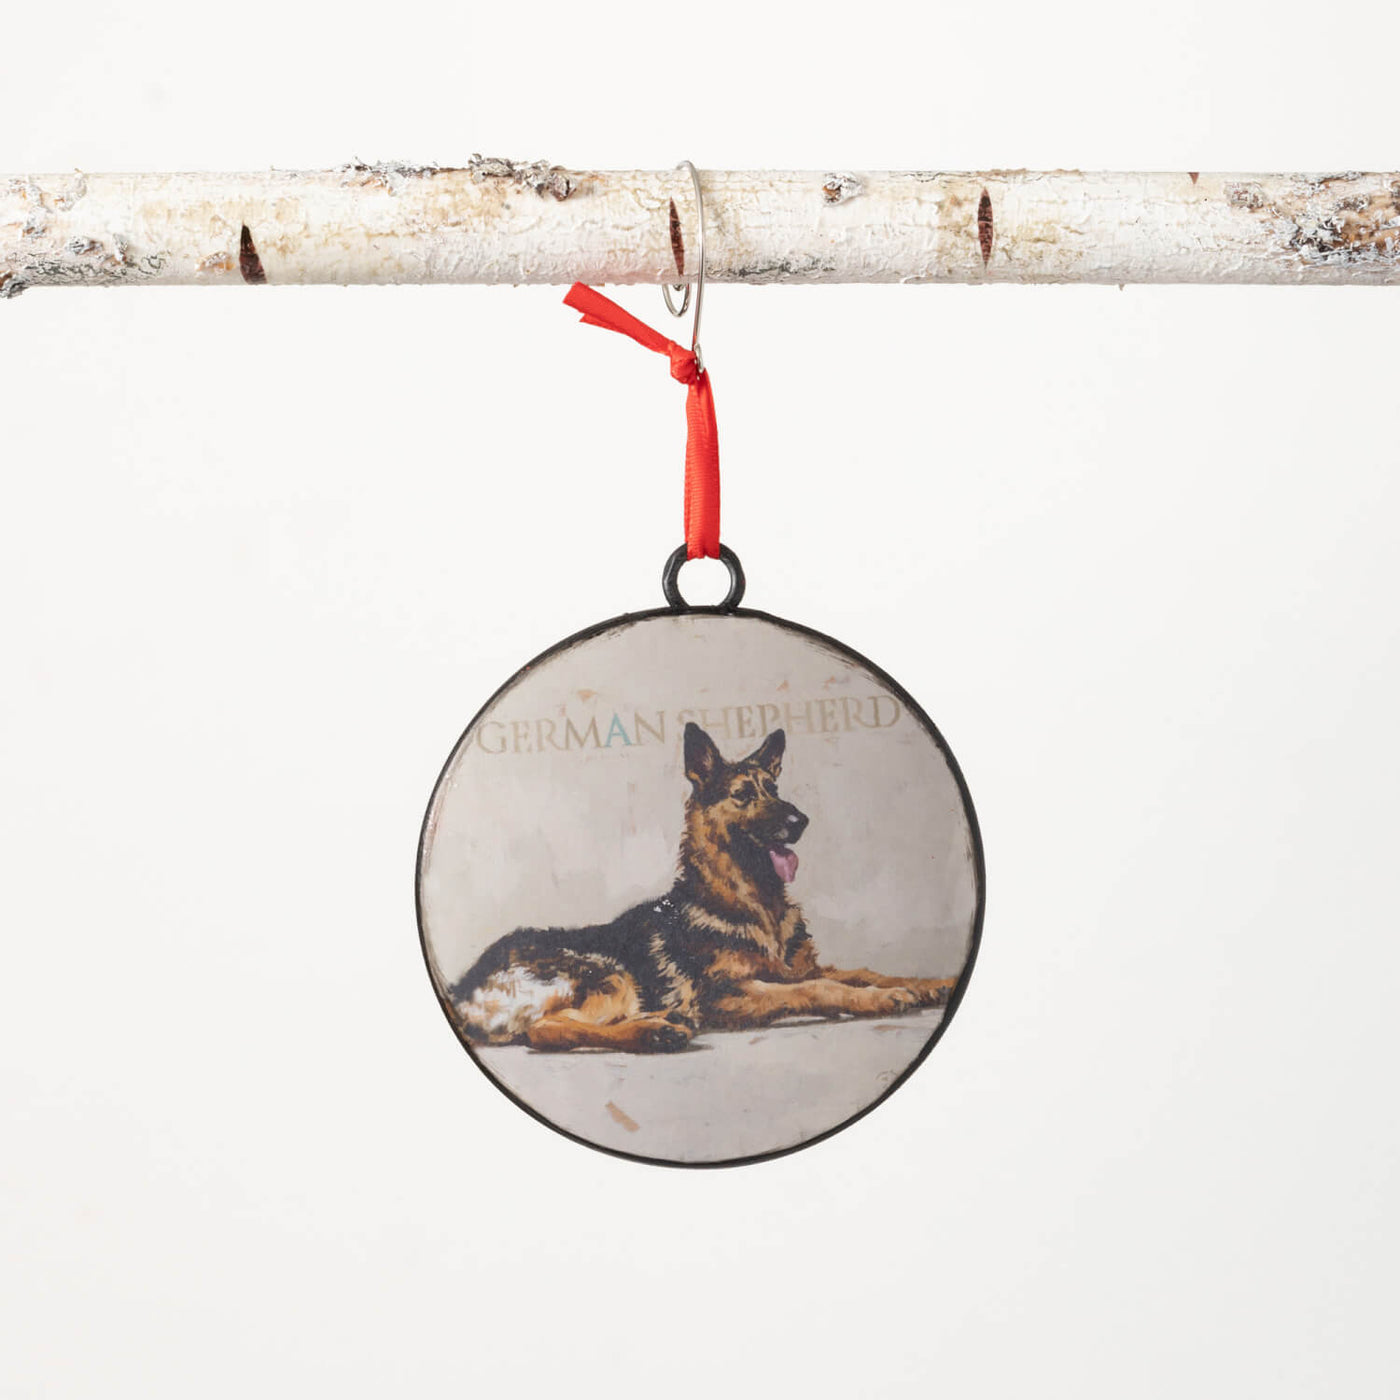 Round metal ornament with a portrait of a German Shepherd on the front, back is red.  Comes with a red ribbon for hanging.